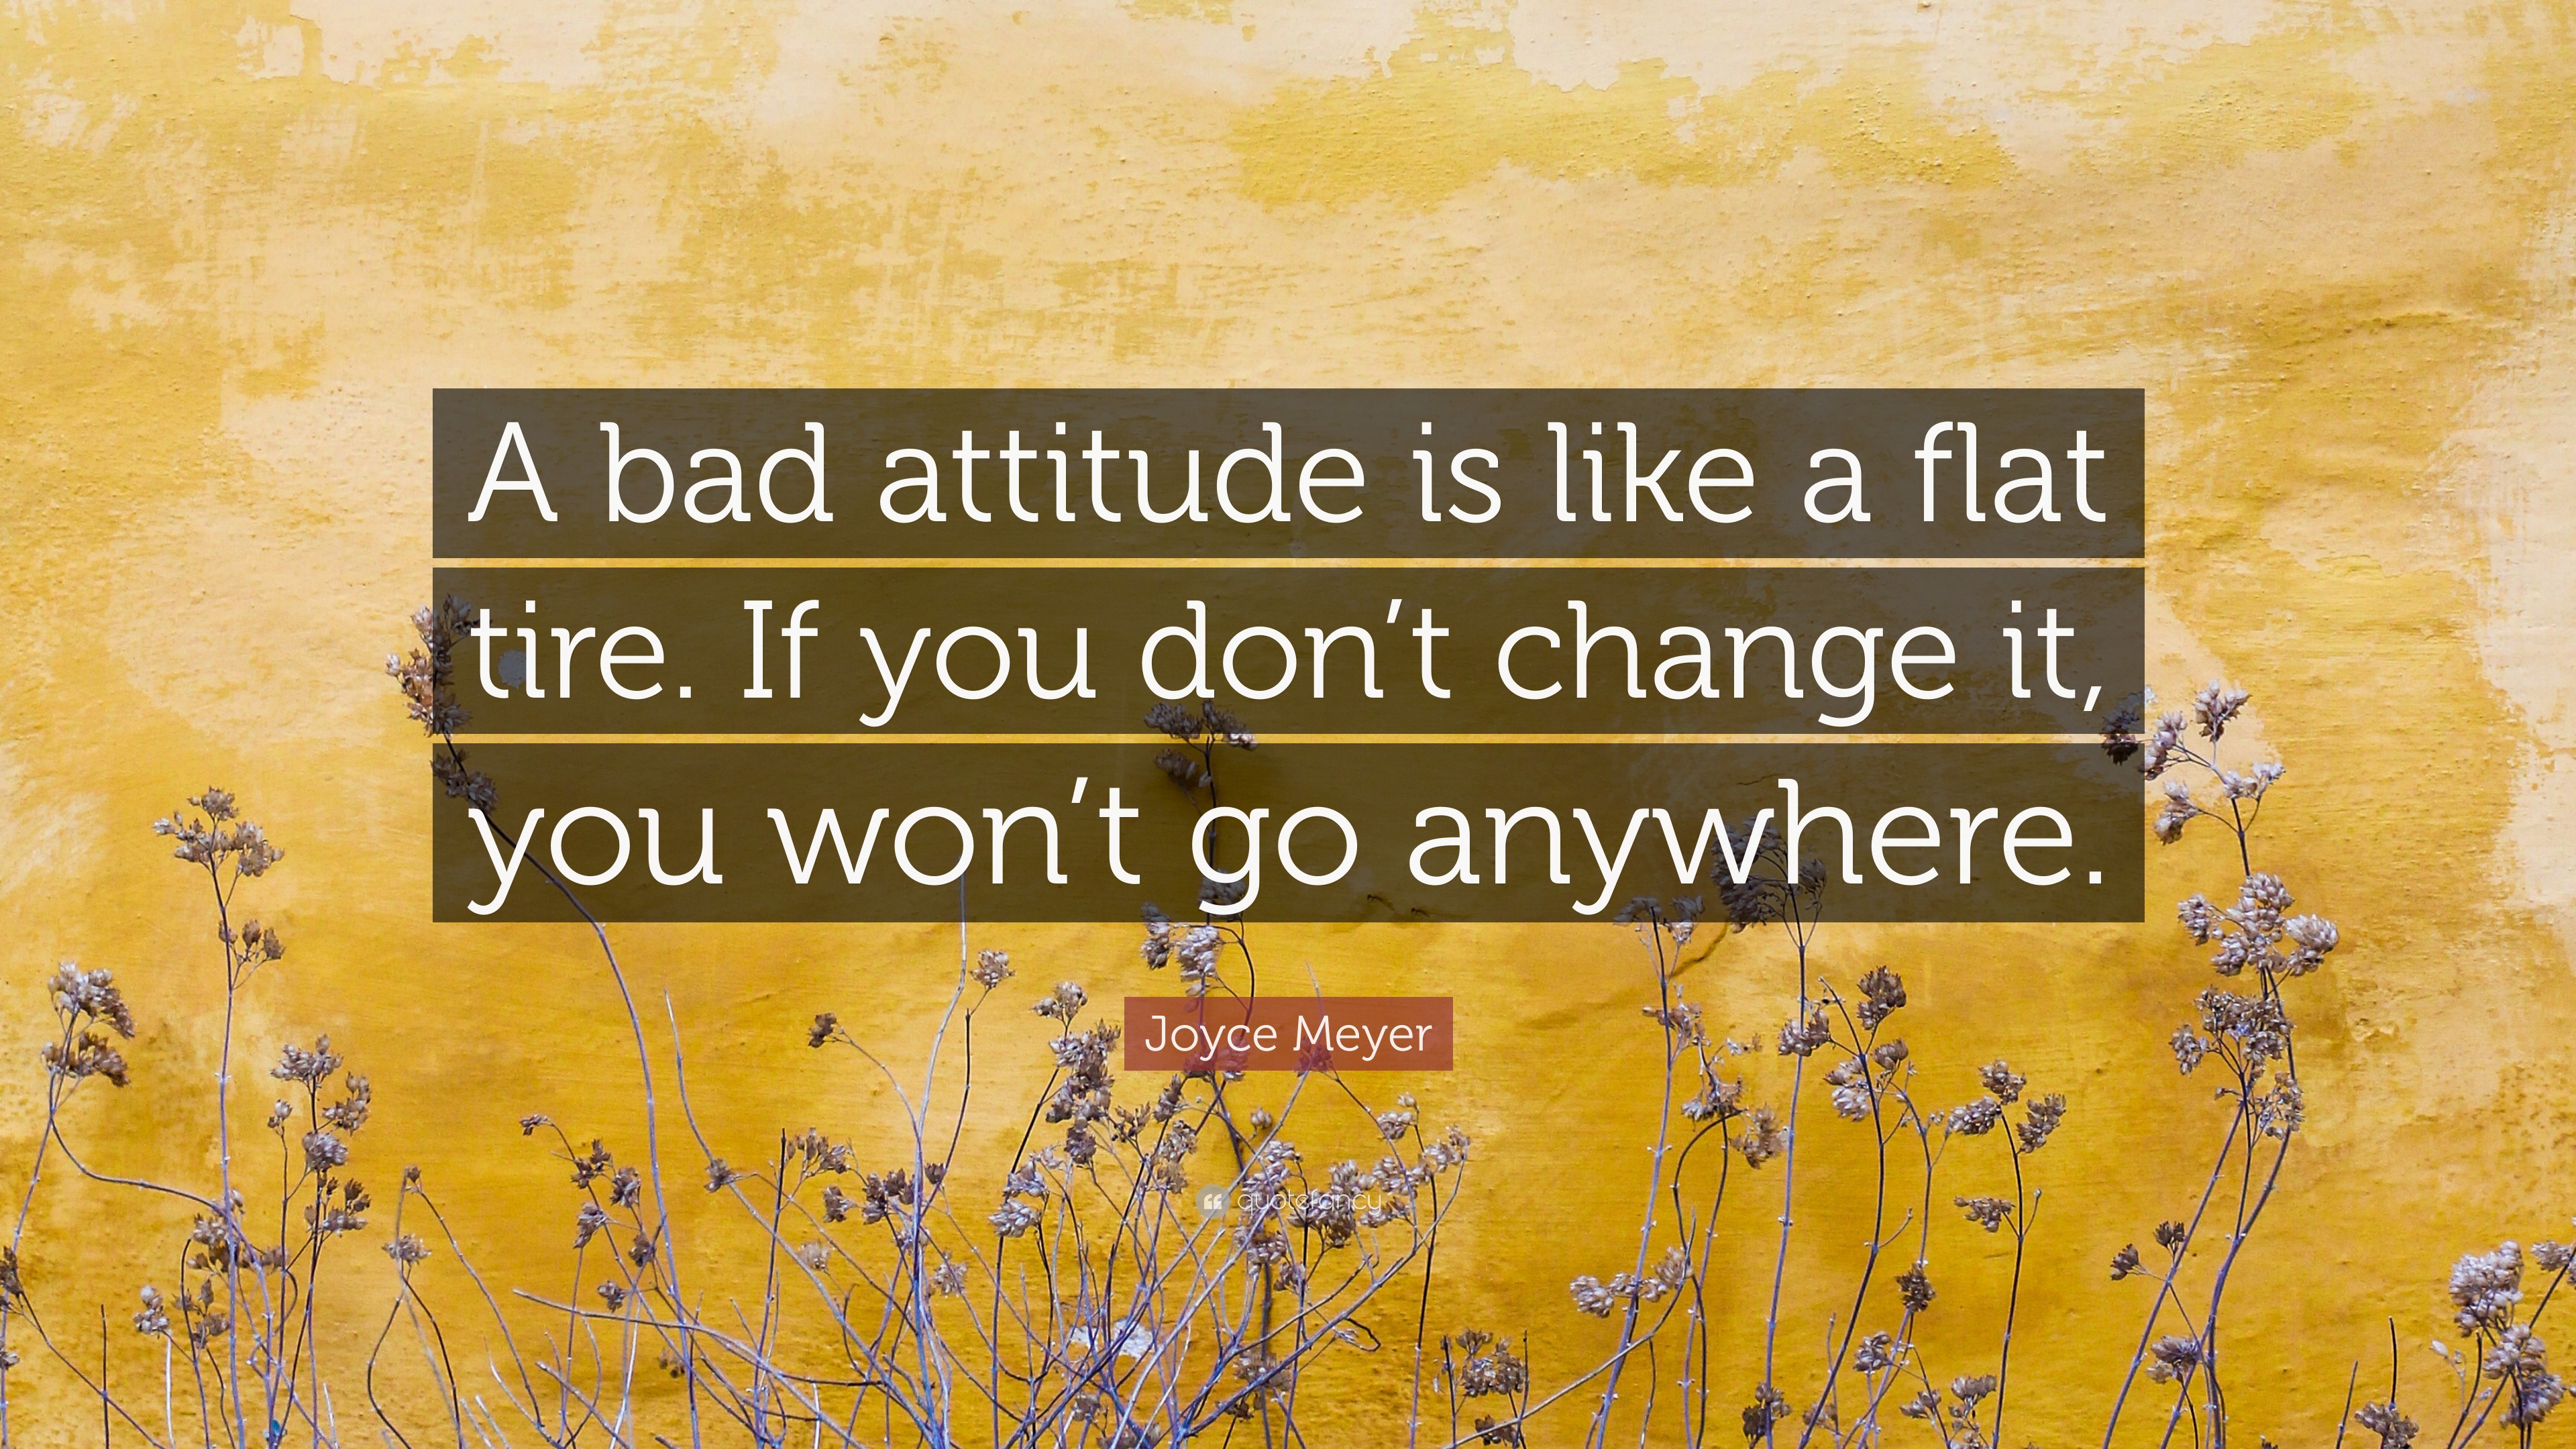 Joyce Meyer Quote: “A bad attitude is like a flat tire. If you don't change